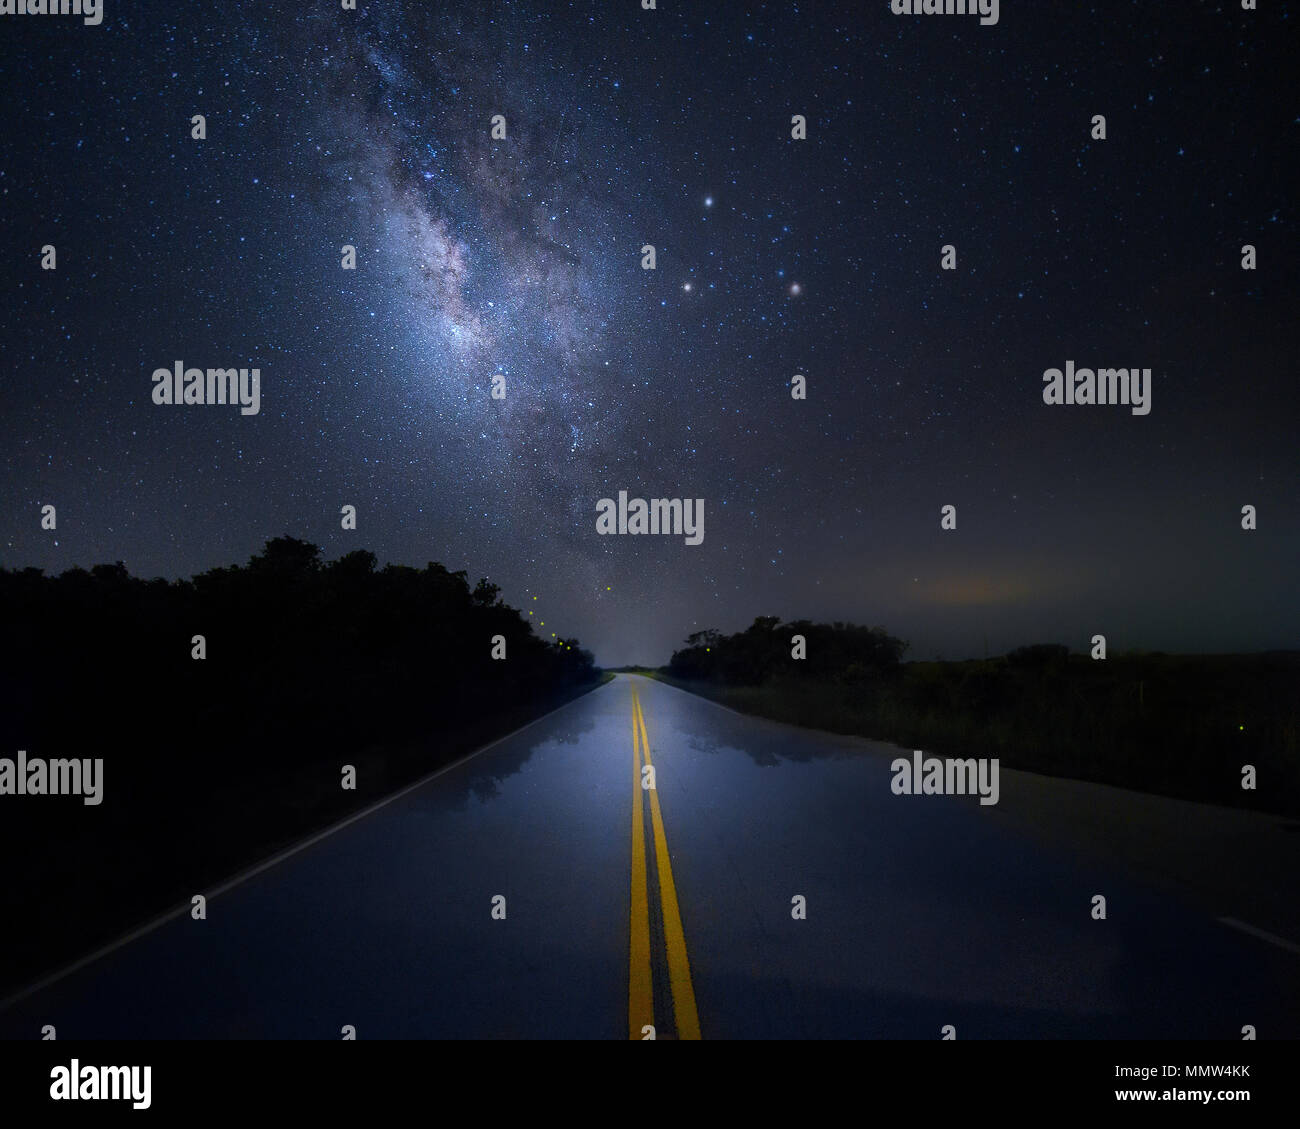 The Scenic Road at Everglades National Park seems to lead right into the Milky Way Galaxy. Several flashing lighting bugs also appear in the photo. Stock Photo